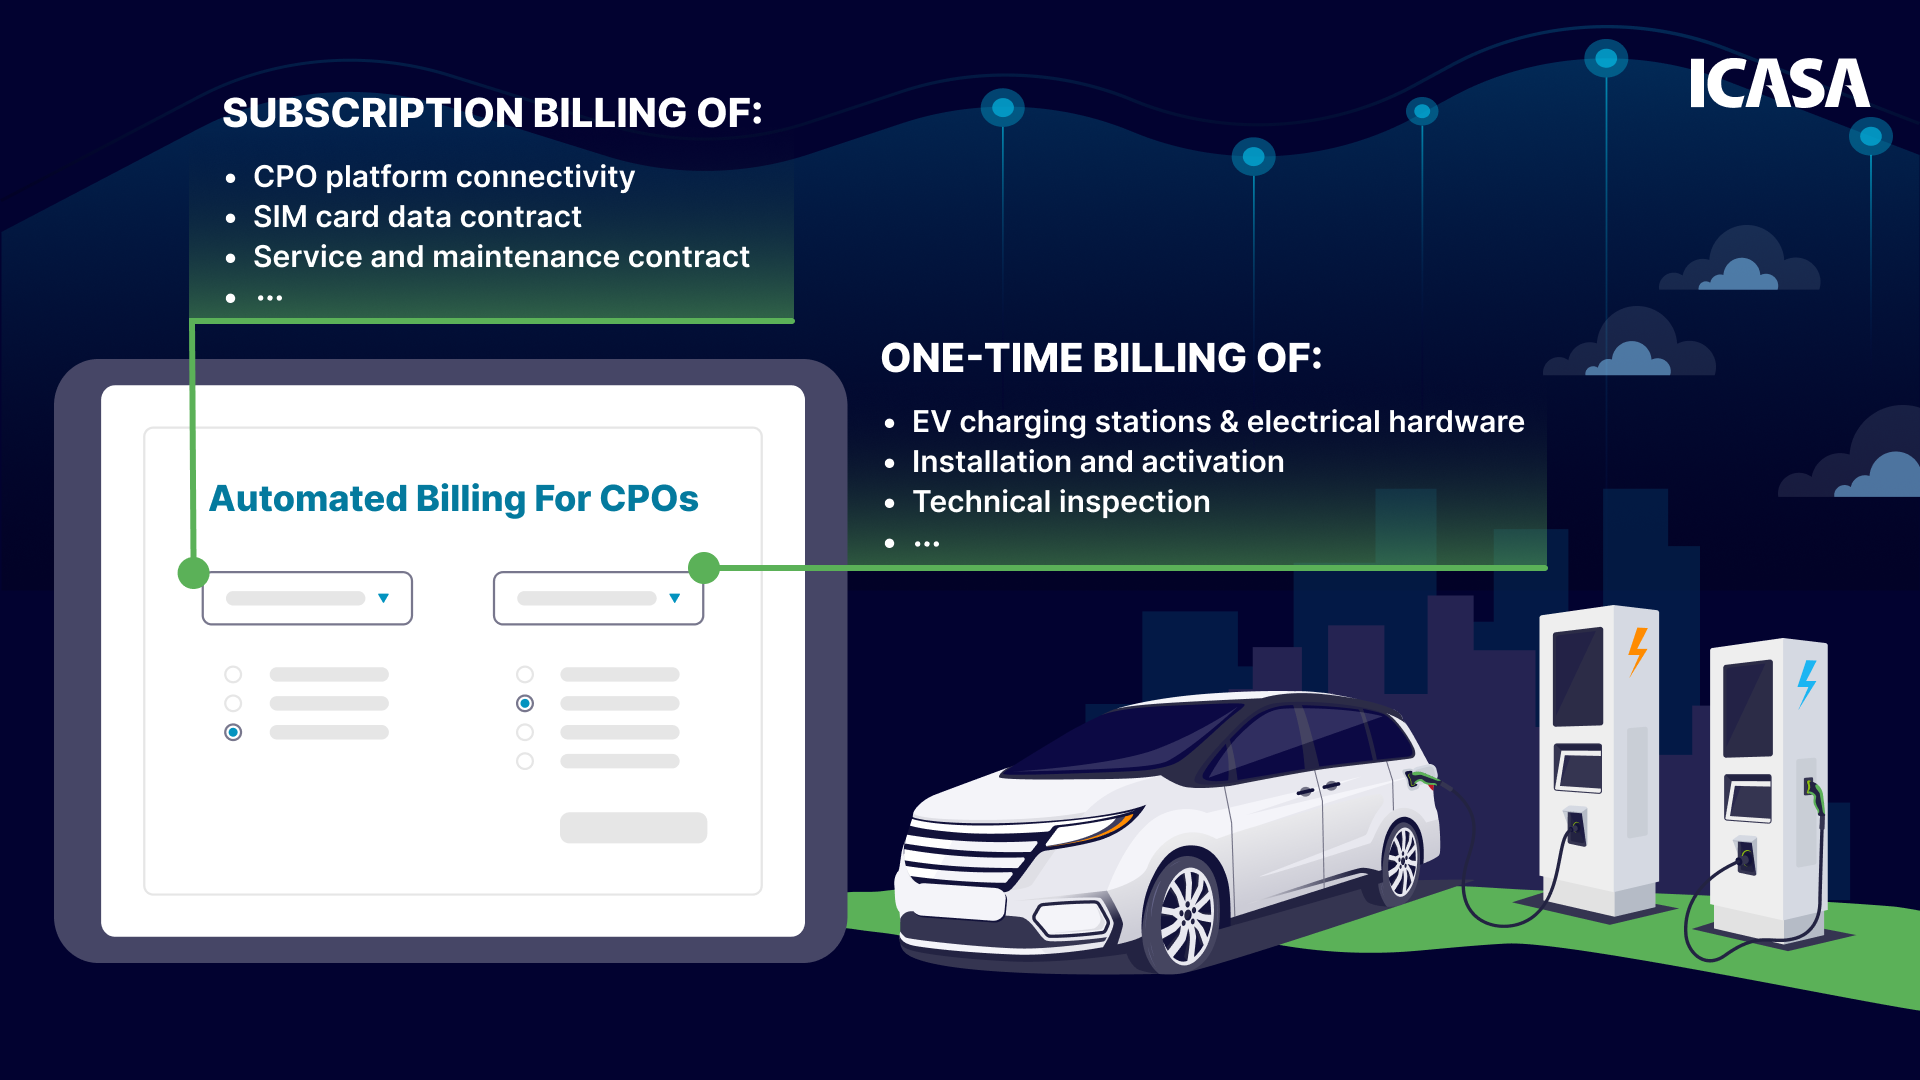 Automated billing for CPOs